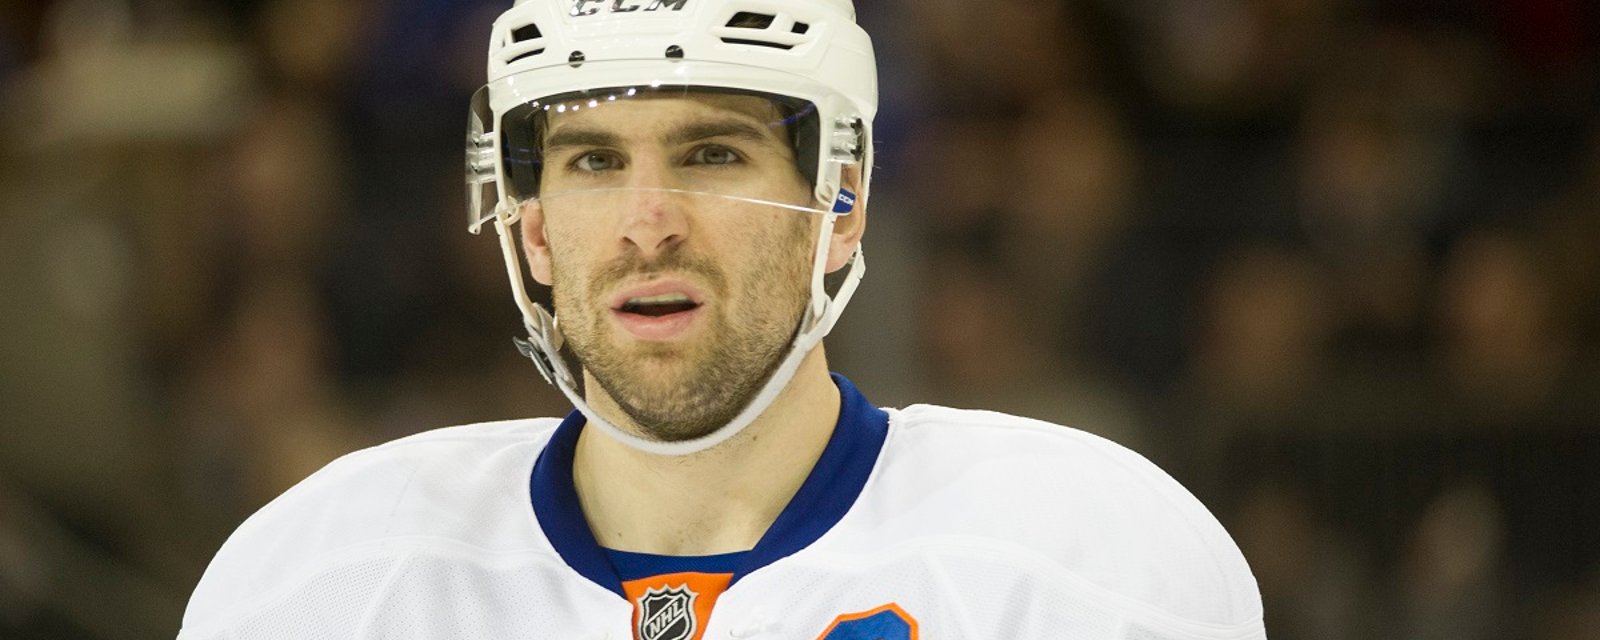 Still no contract for Tavares, and “no indications” that he is ready to sign.